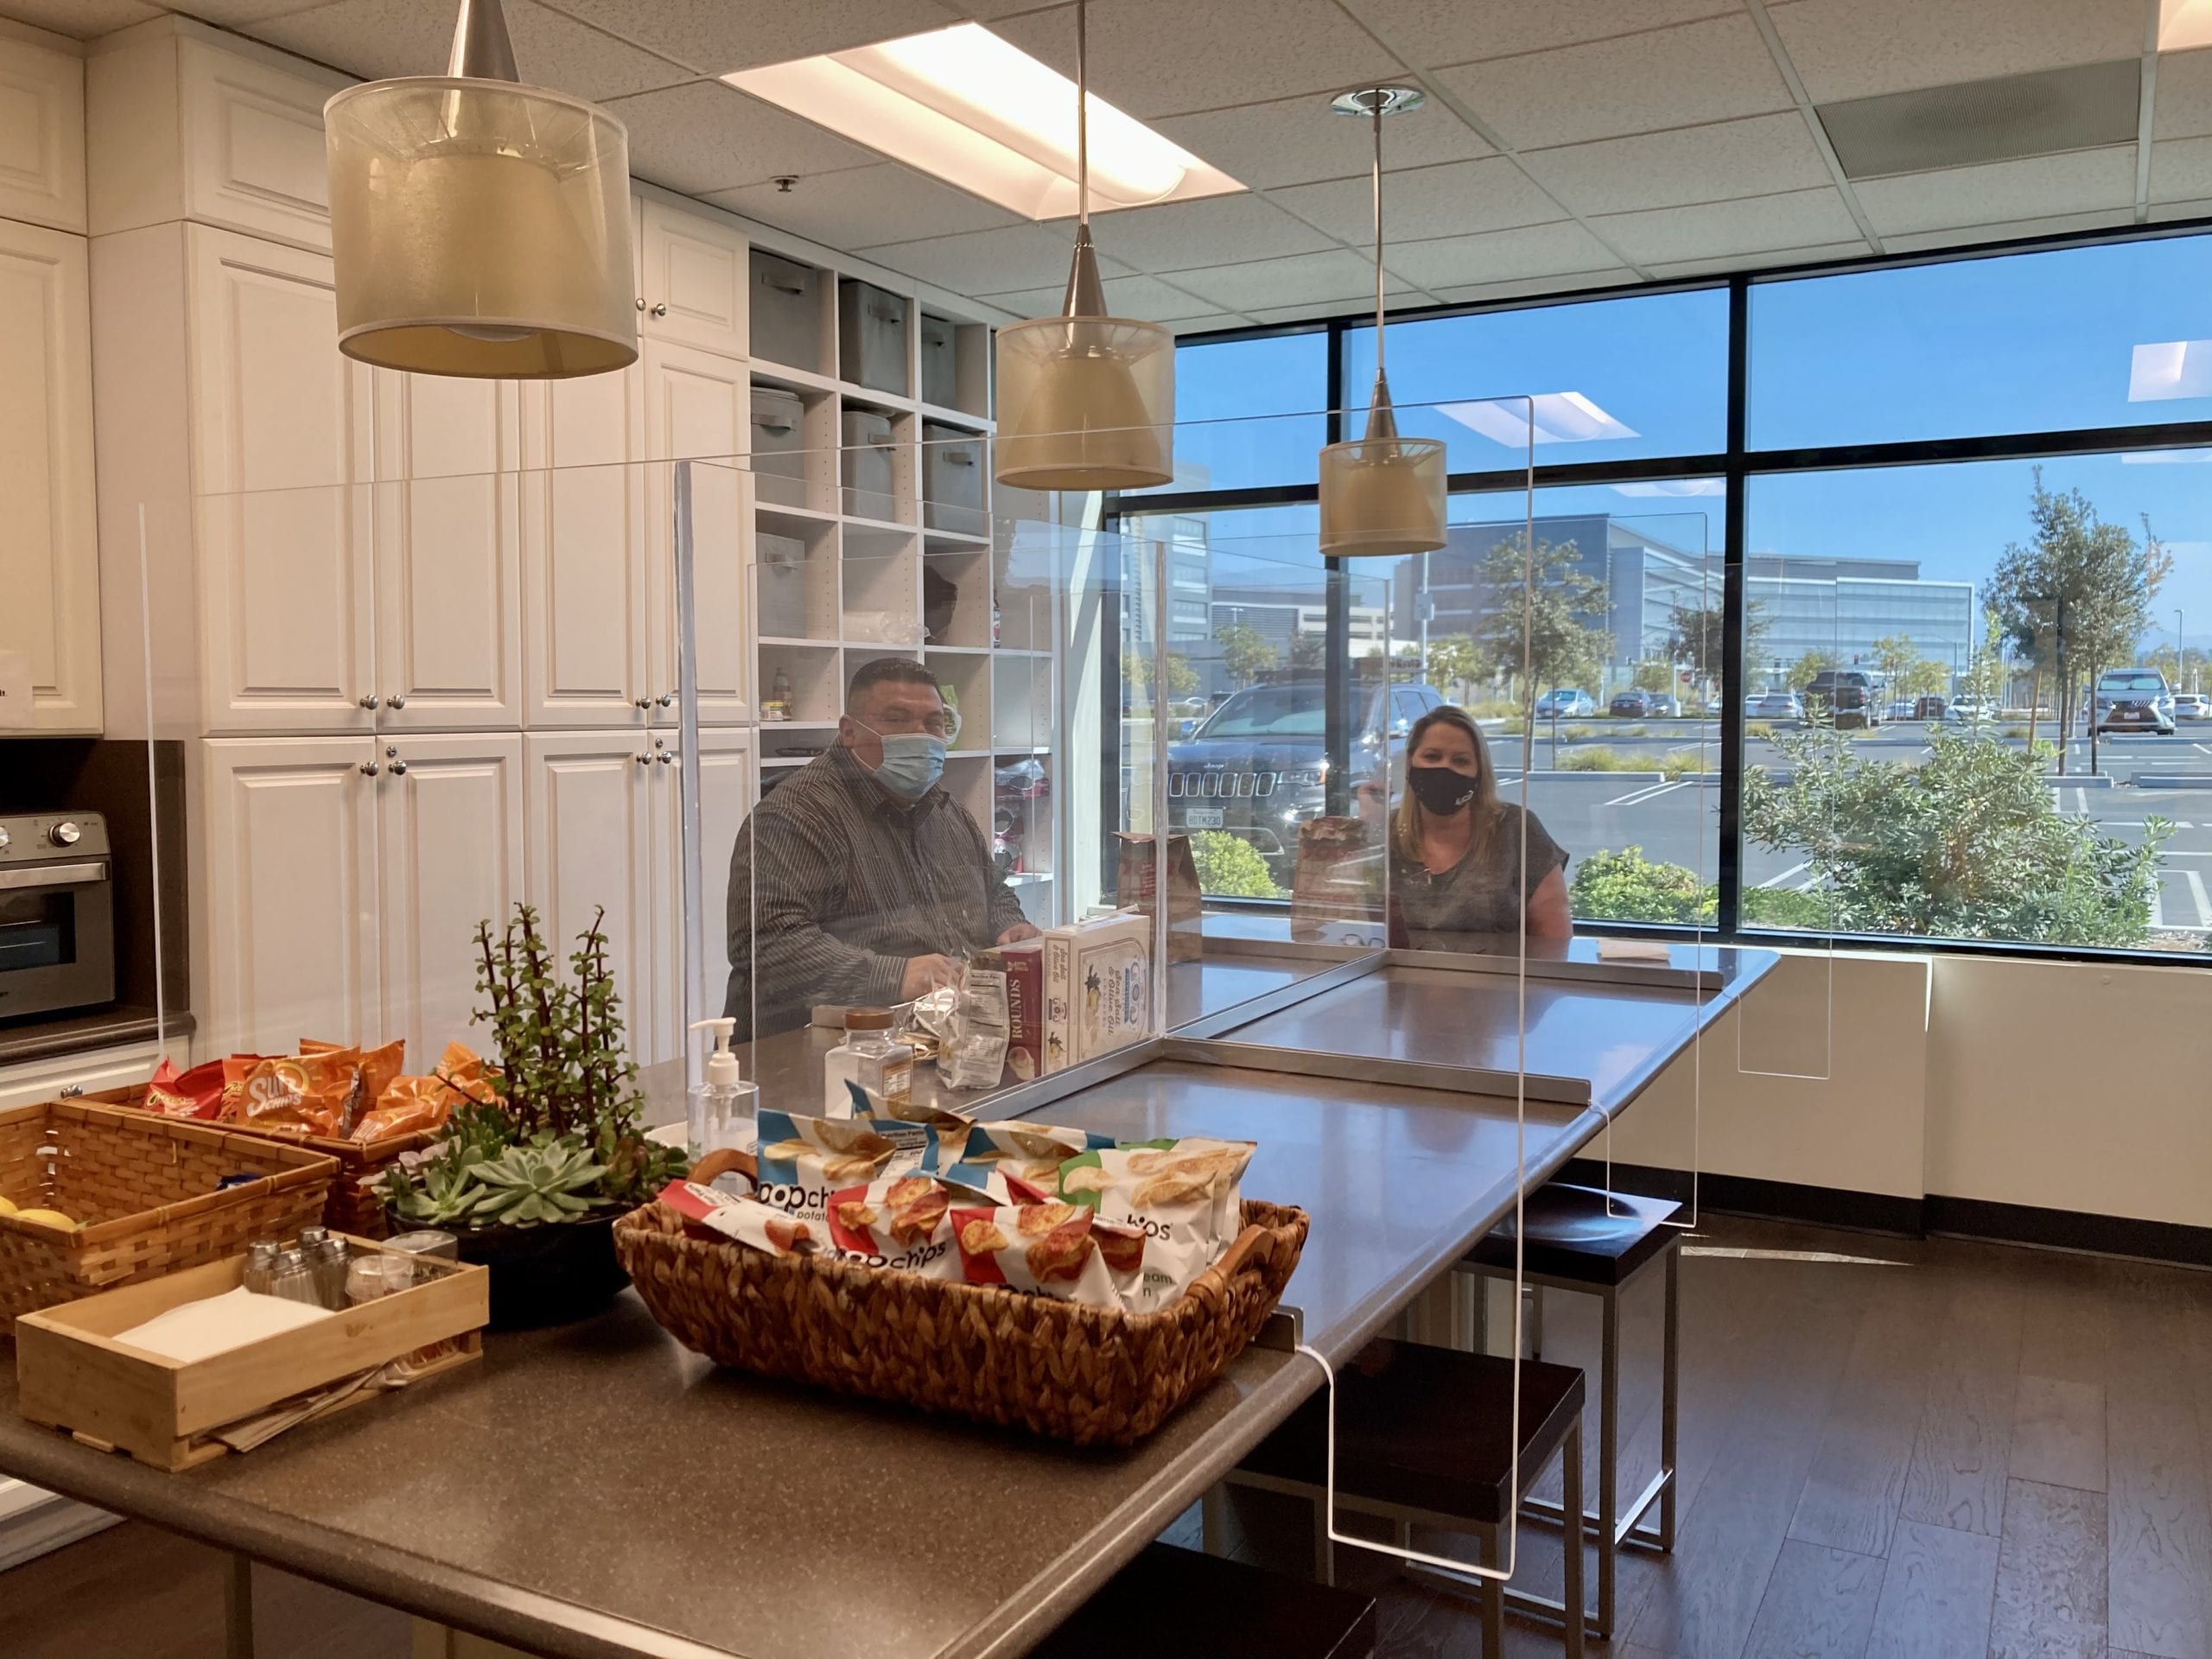 plexiglass partitions allow two employees to collaborate in kitchen